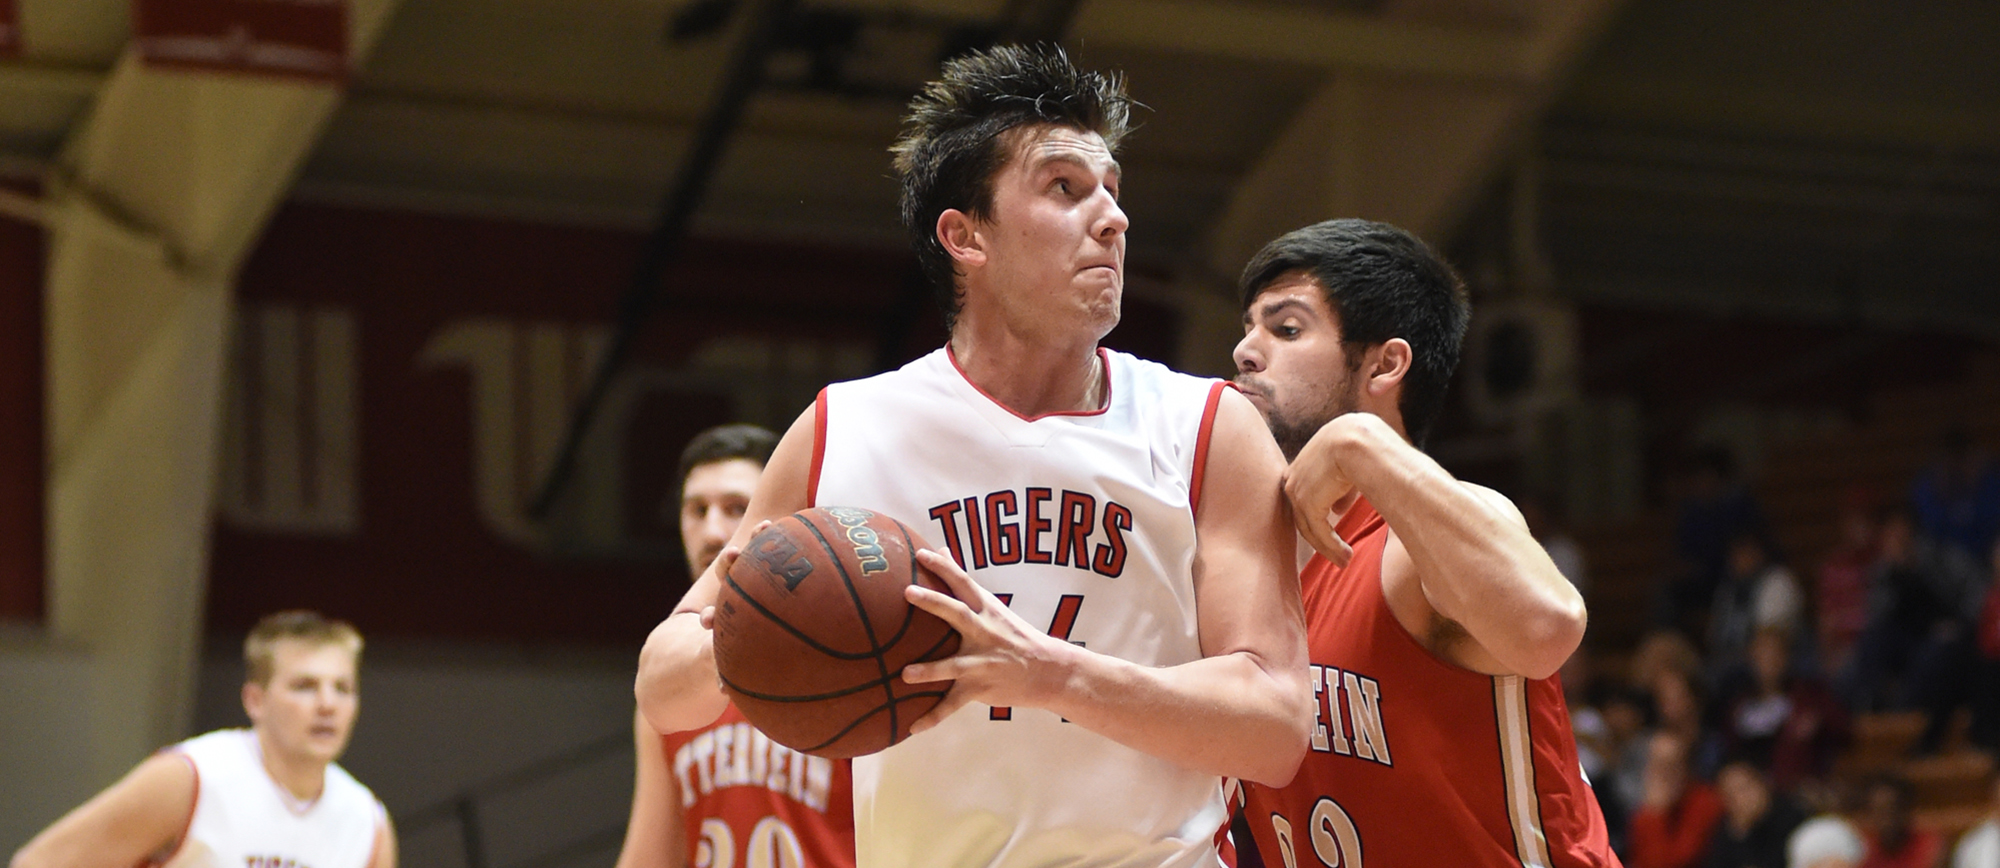 Chris Sloneker lead the way in the scoring column for the Tigers. File Photo| Nick Falzerano